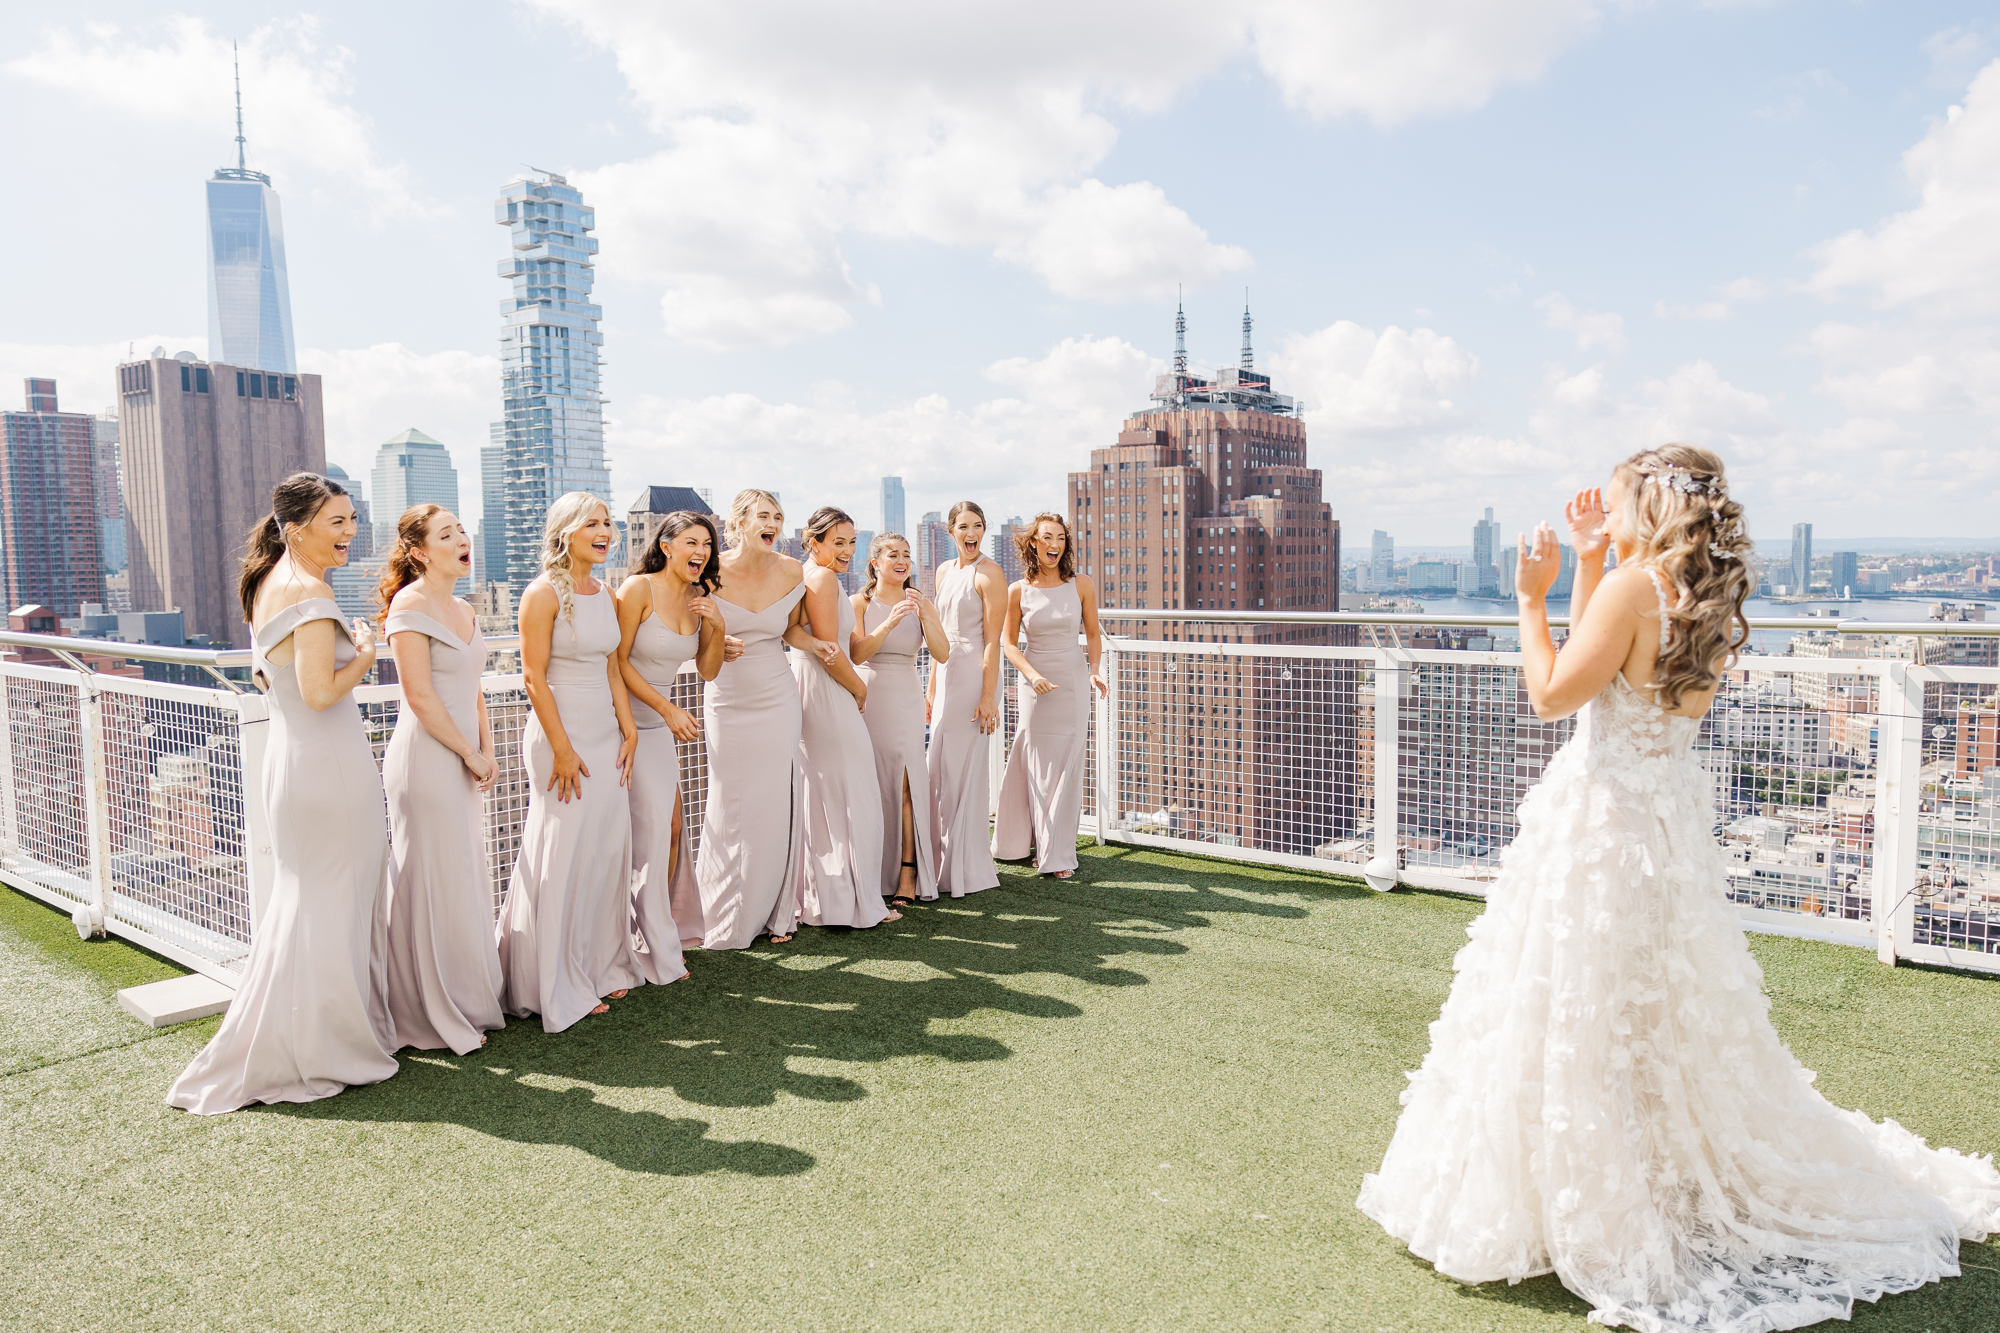 Picturesque New York Wedding Photos at Old St. Patrick's Cathedral and Houston Hall